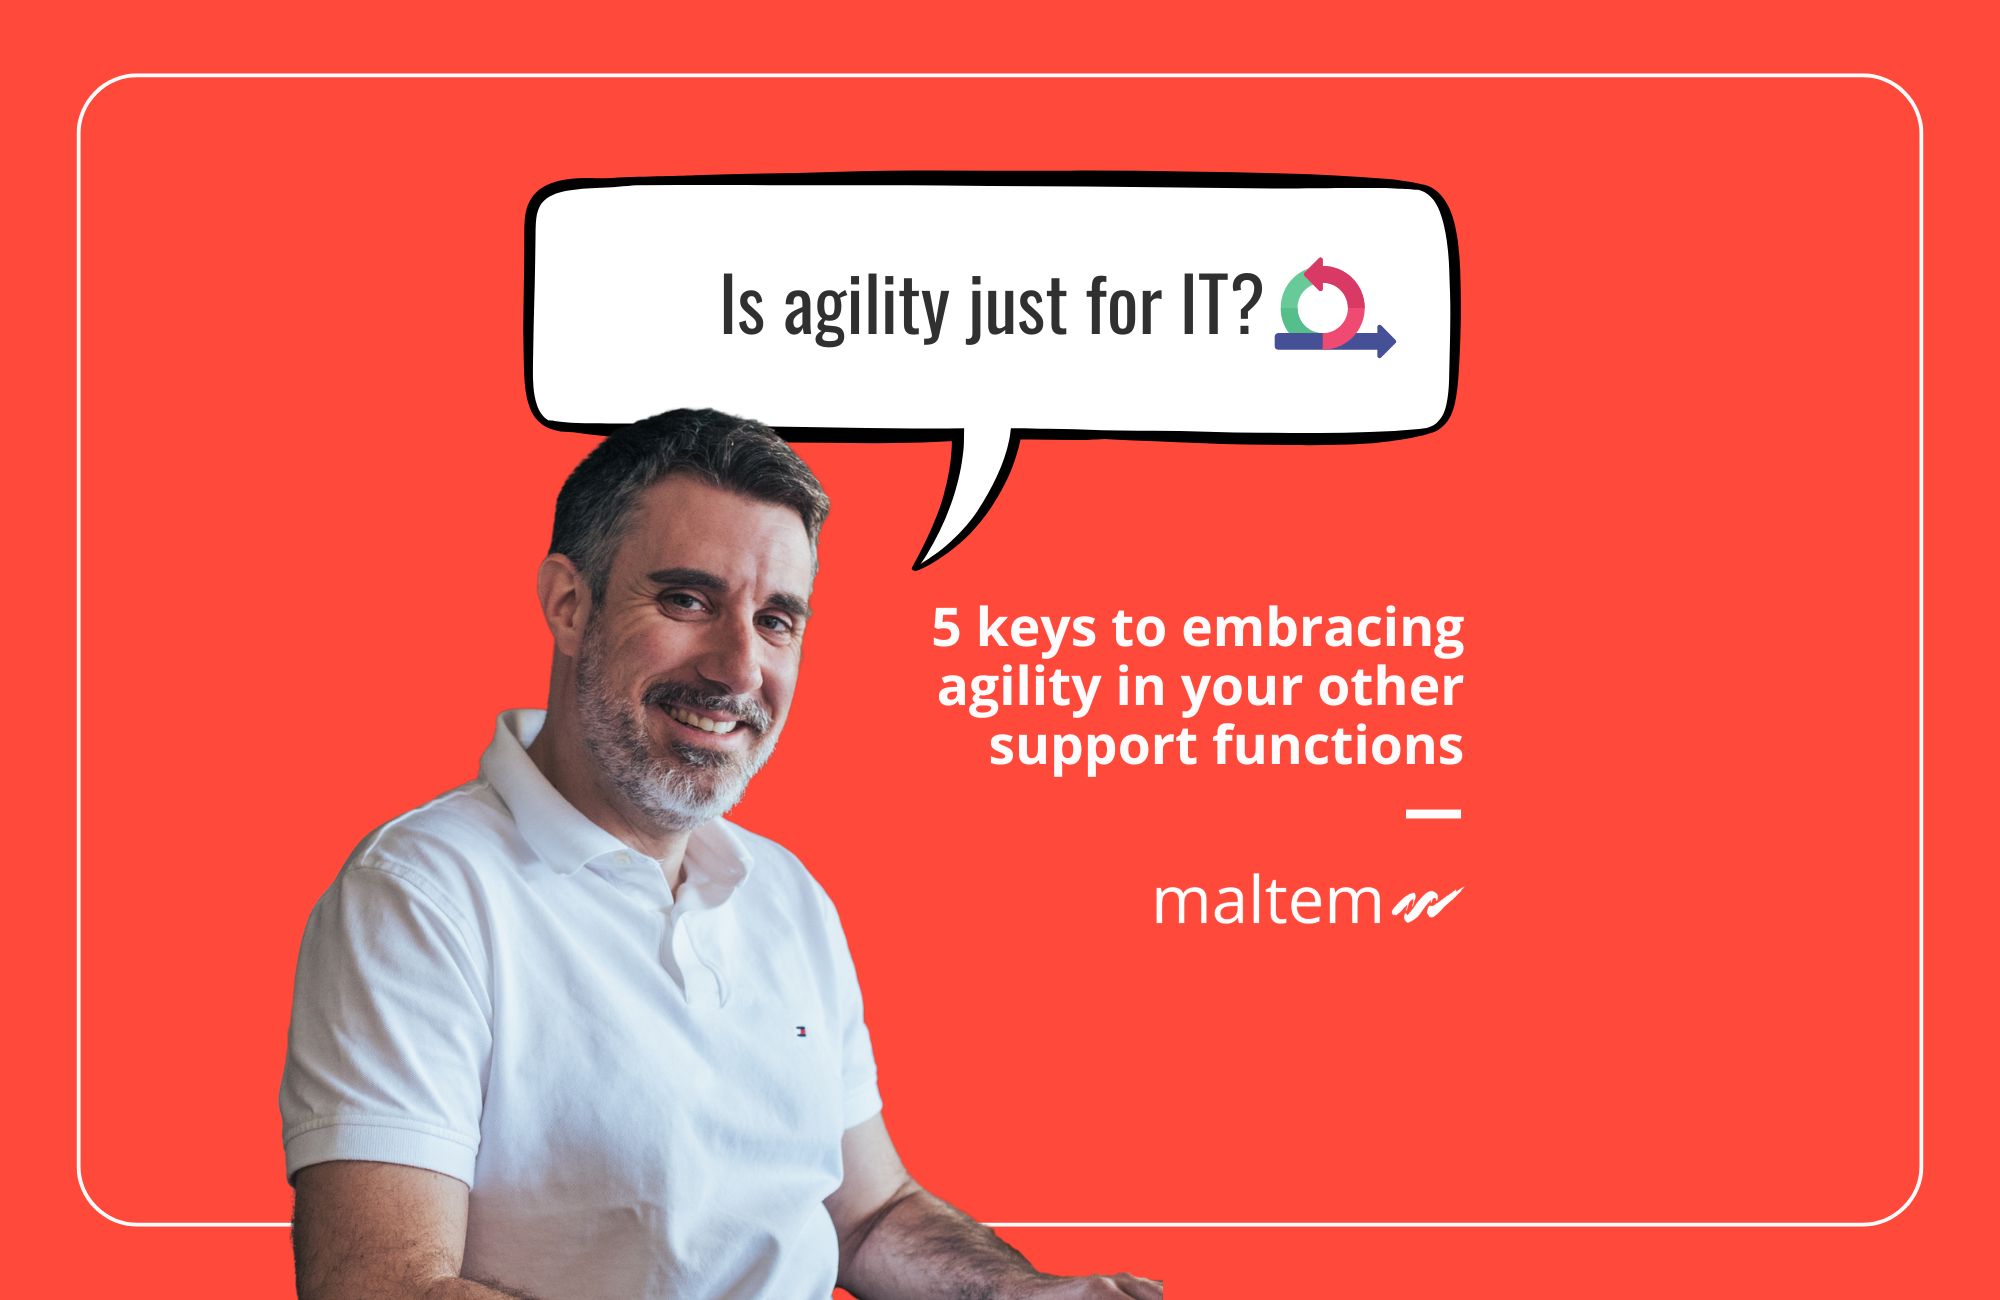 Is agility just for IT? 5 keys to embracing agility in your other support functions